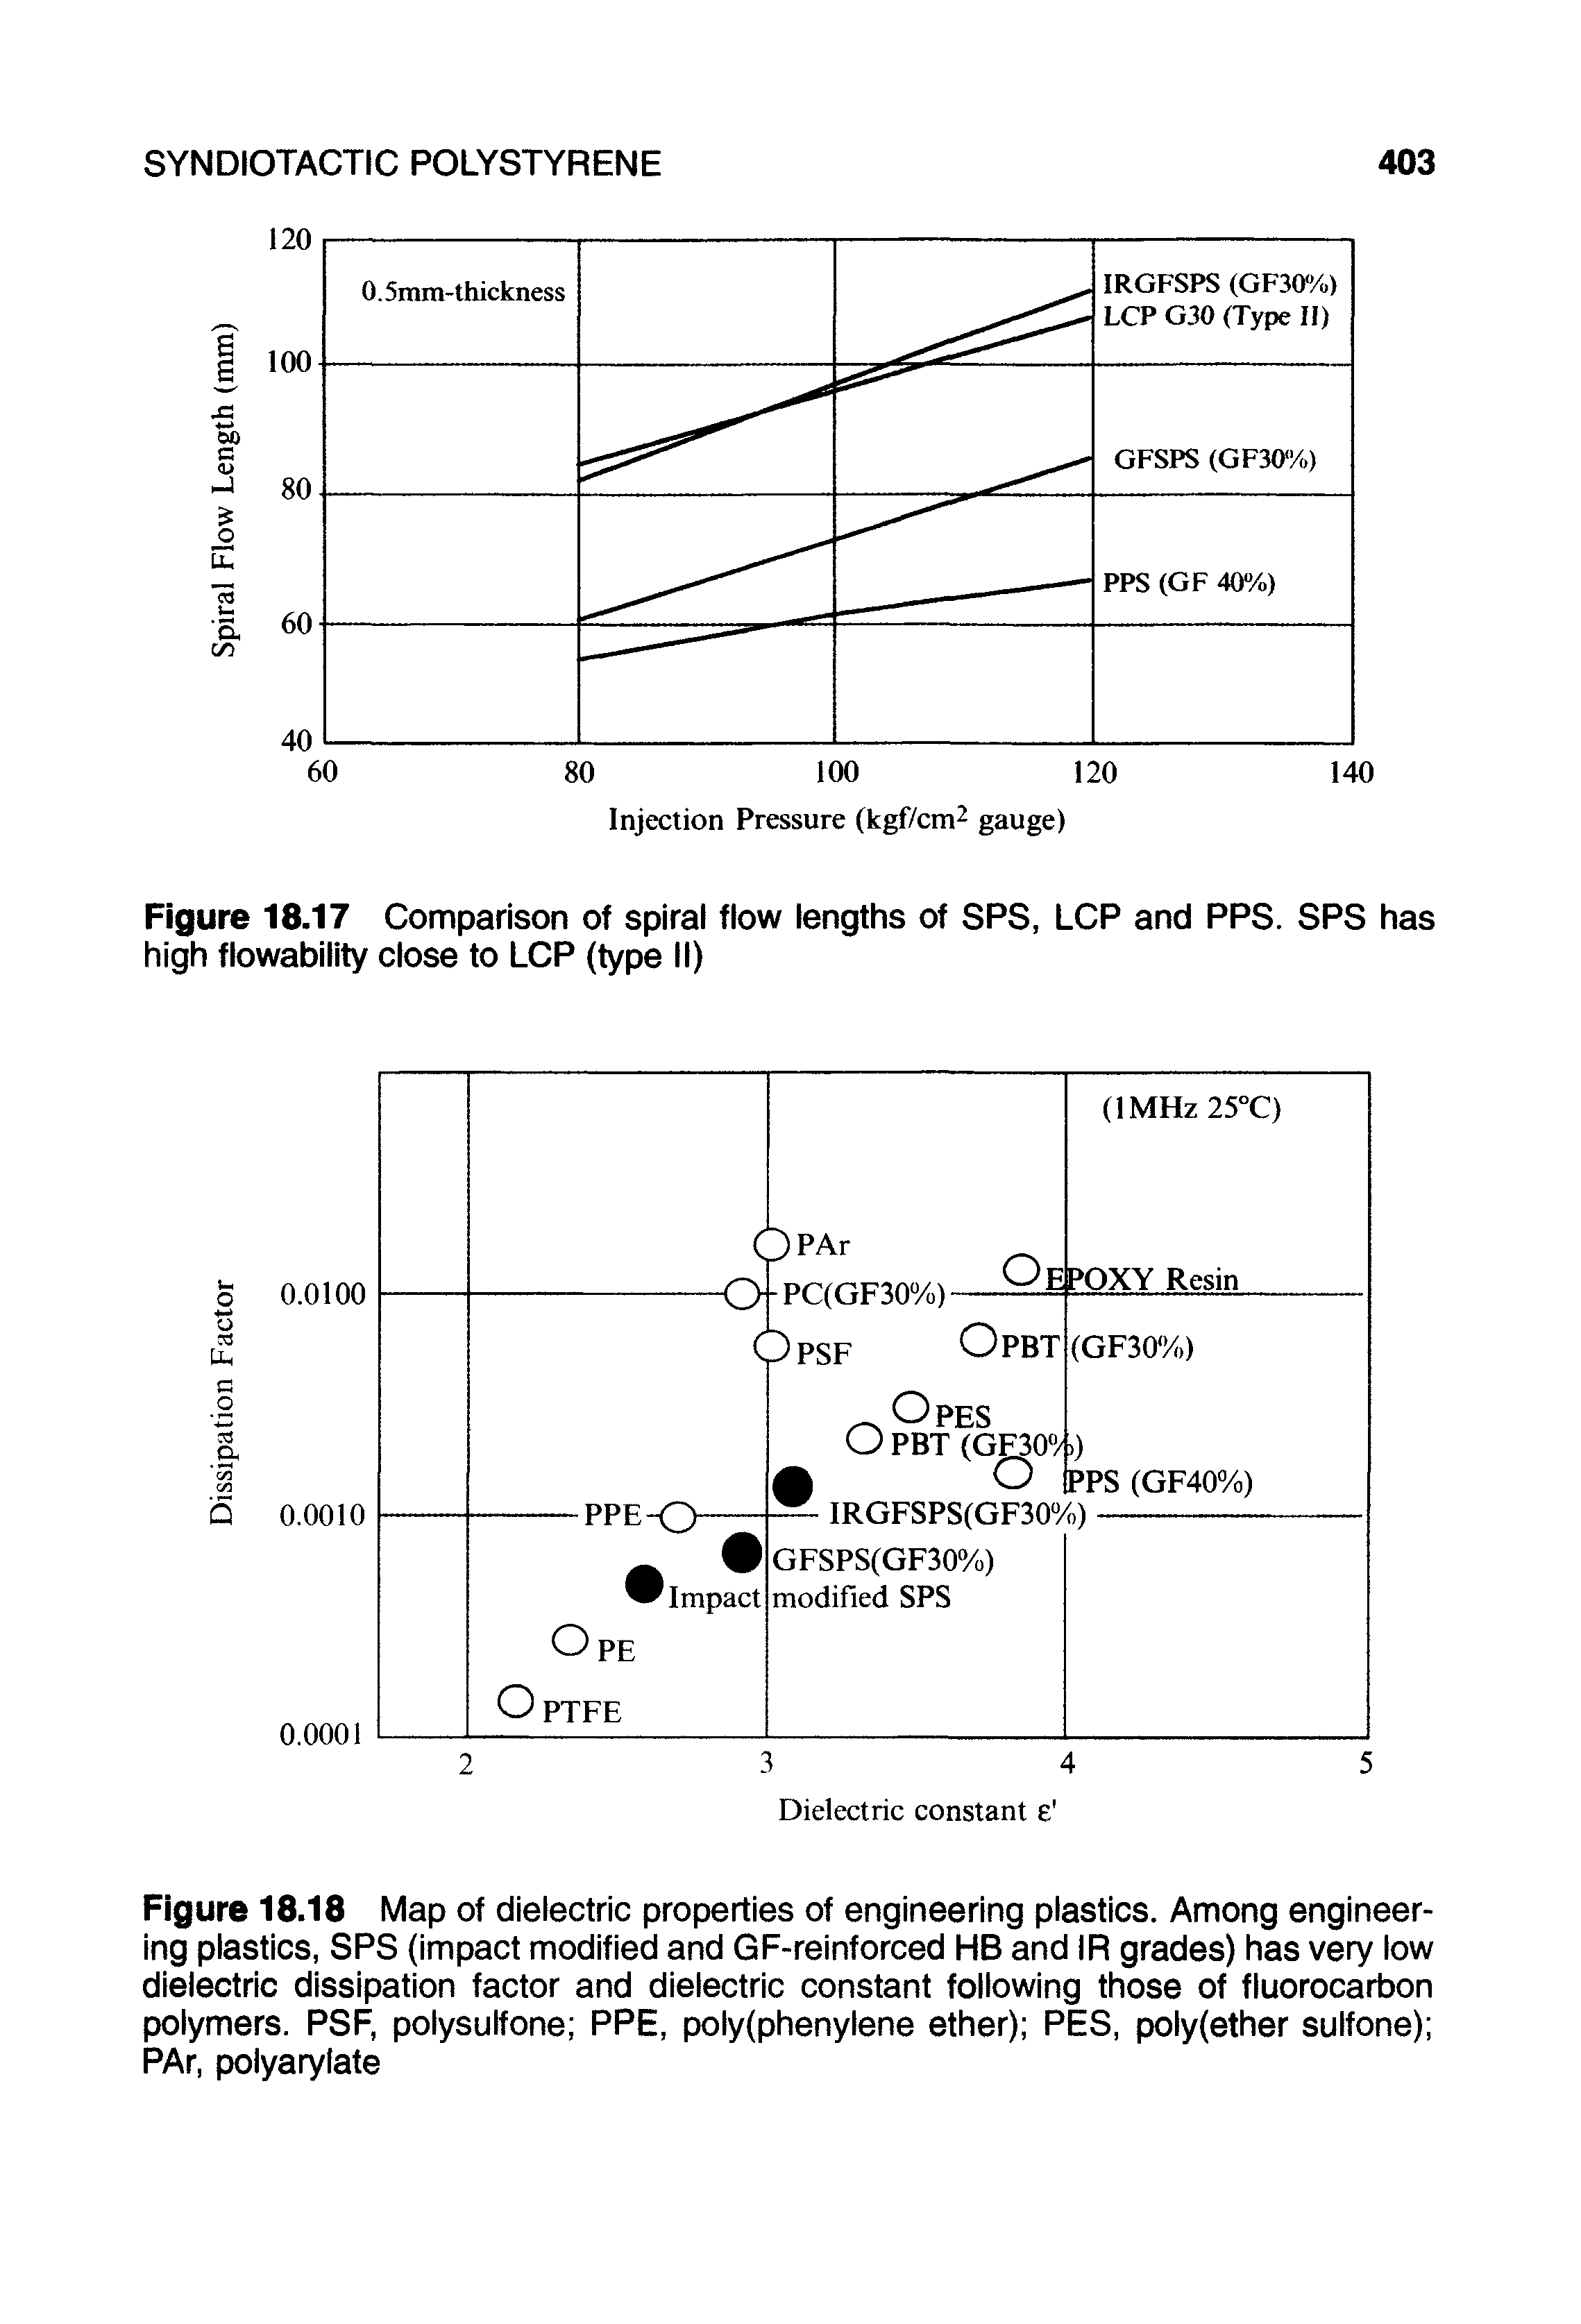 Figure 18.18 Map of dielectric properties of engineering plastics. Among engineering plastics, SPS (impact modified and GF-reinforced HB and IR grades) has very low dielectric dissipation factor and dielectric constant following those of fluorocarbon polymers. PSF, polysulfone PPE, poly(phenylene ether) PES, poly(ether sulfone) PAr, polyarylate...